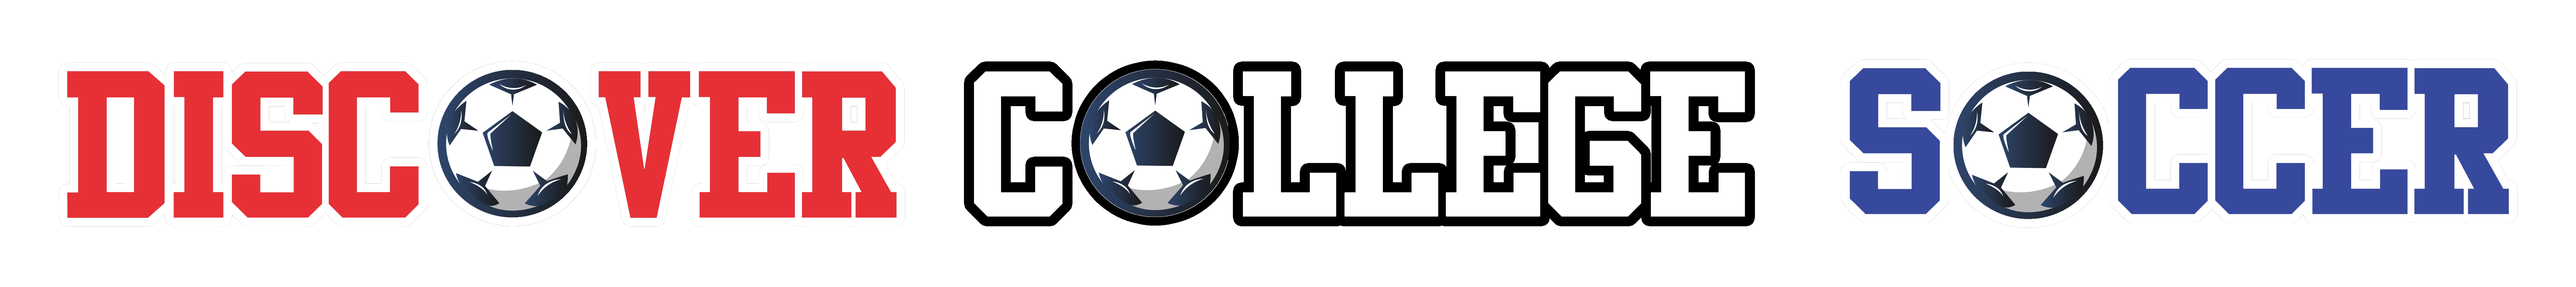 Logo for Discover College Soccer